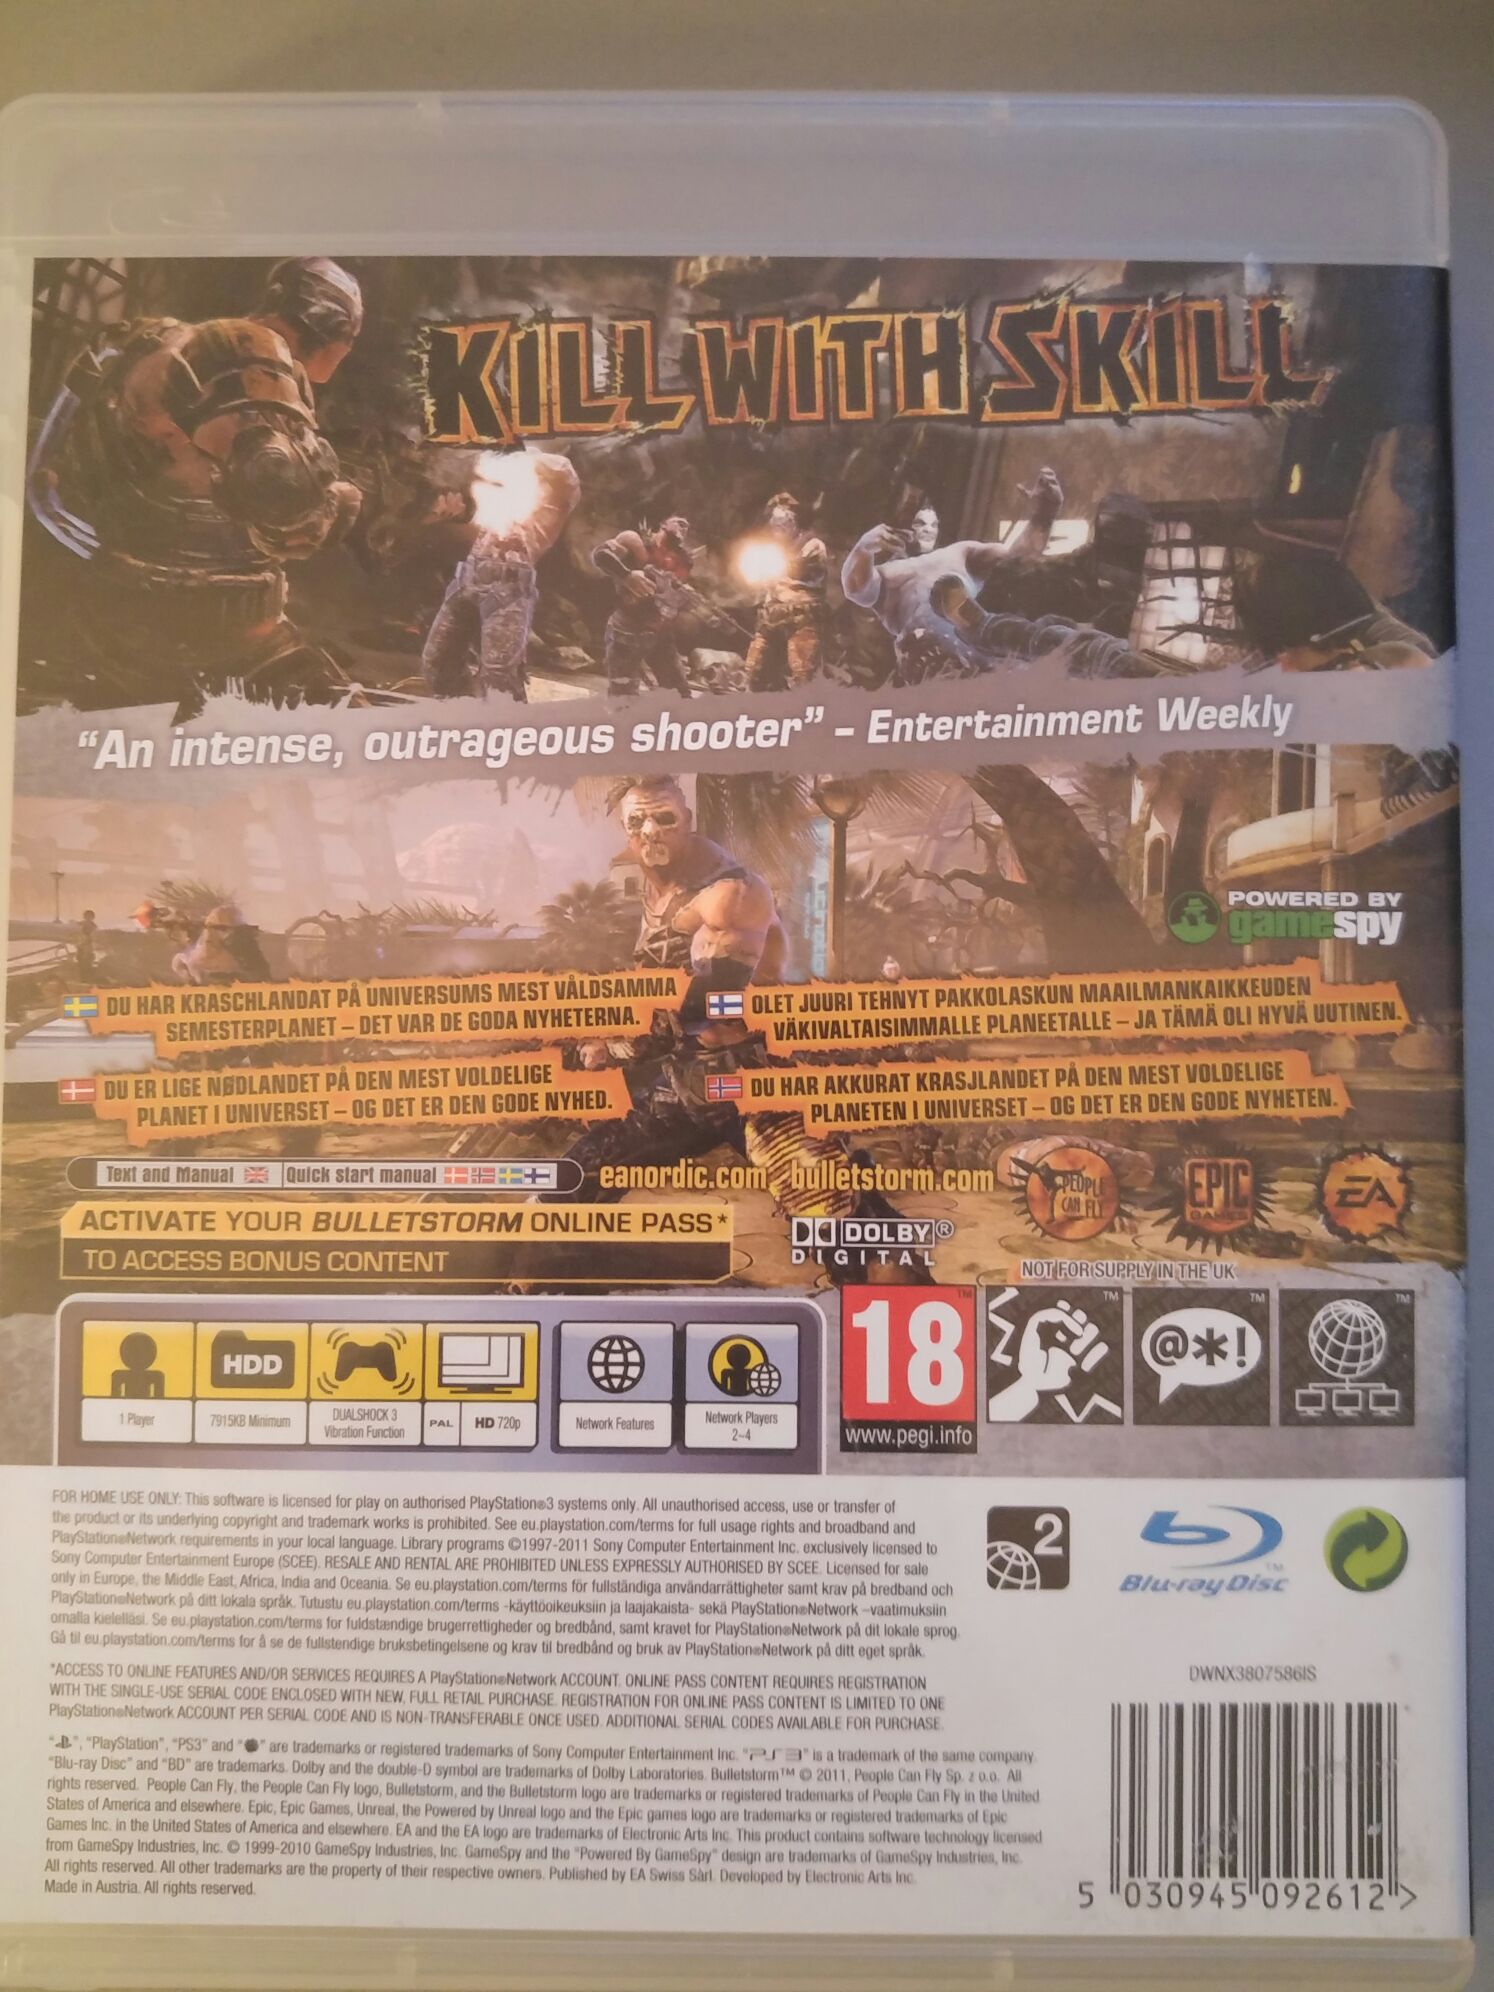 Bulletstorm - Sony PlayStation 3 (PS3) (Electronic Arts - 2) video game collectible [Barcode 5030945092612] - Main Image 2